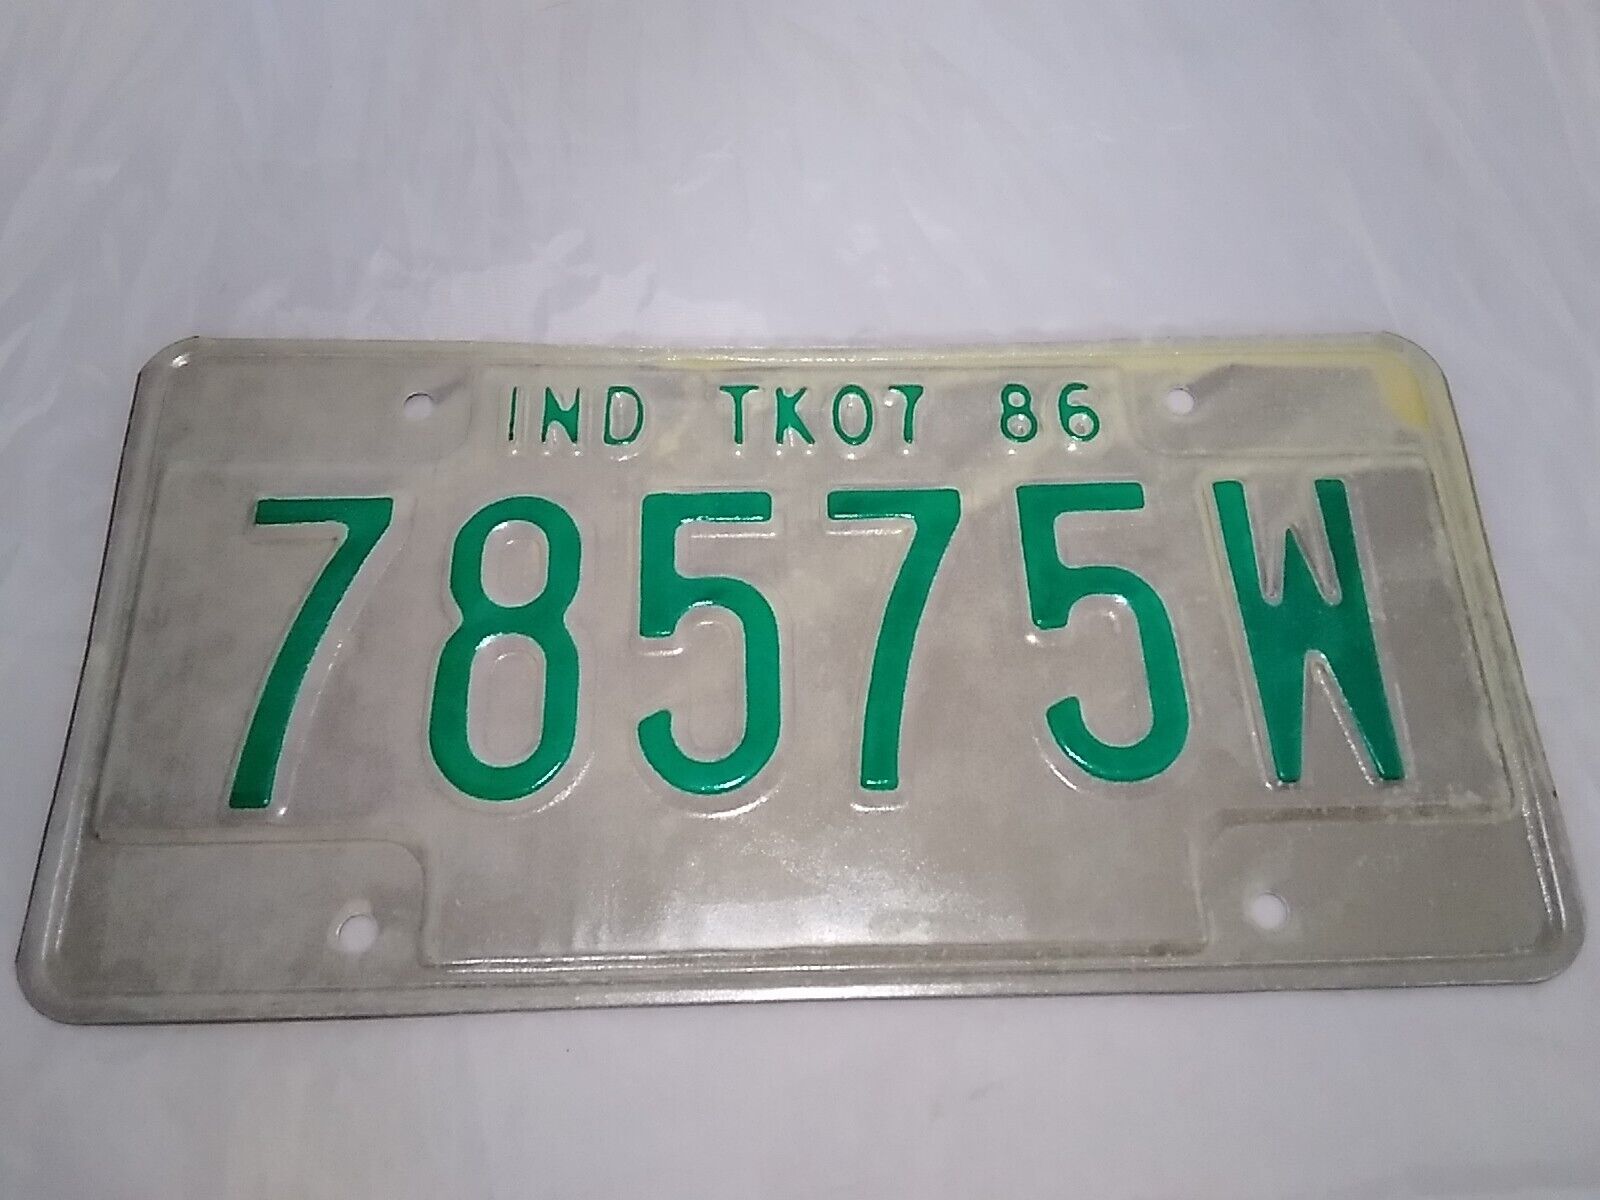 Vintage 1986 Indiana Truck License Plate 78575W